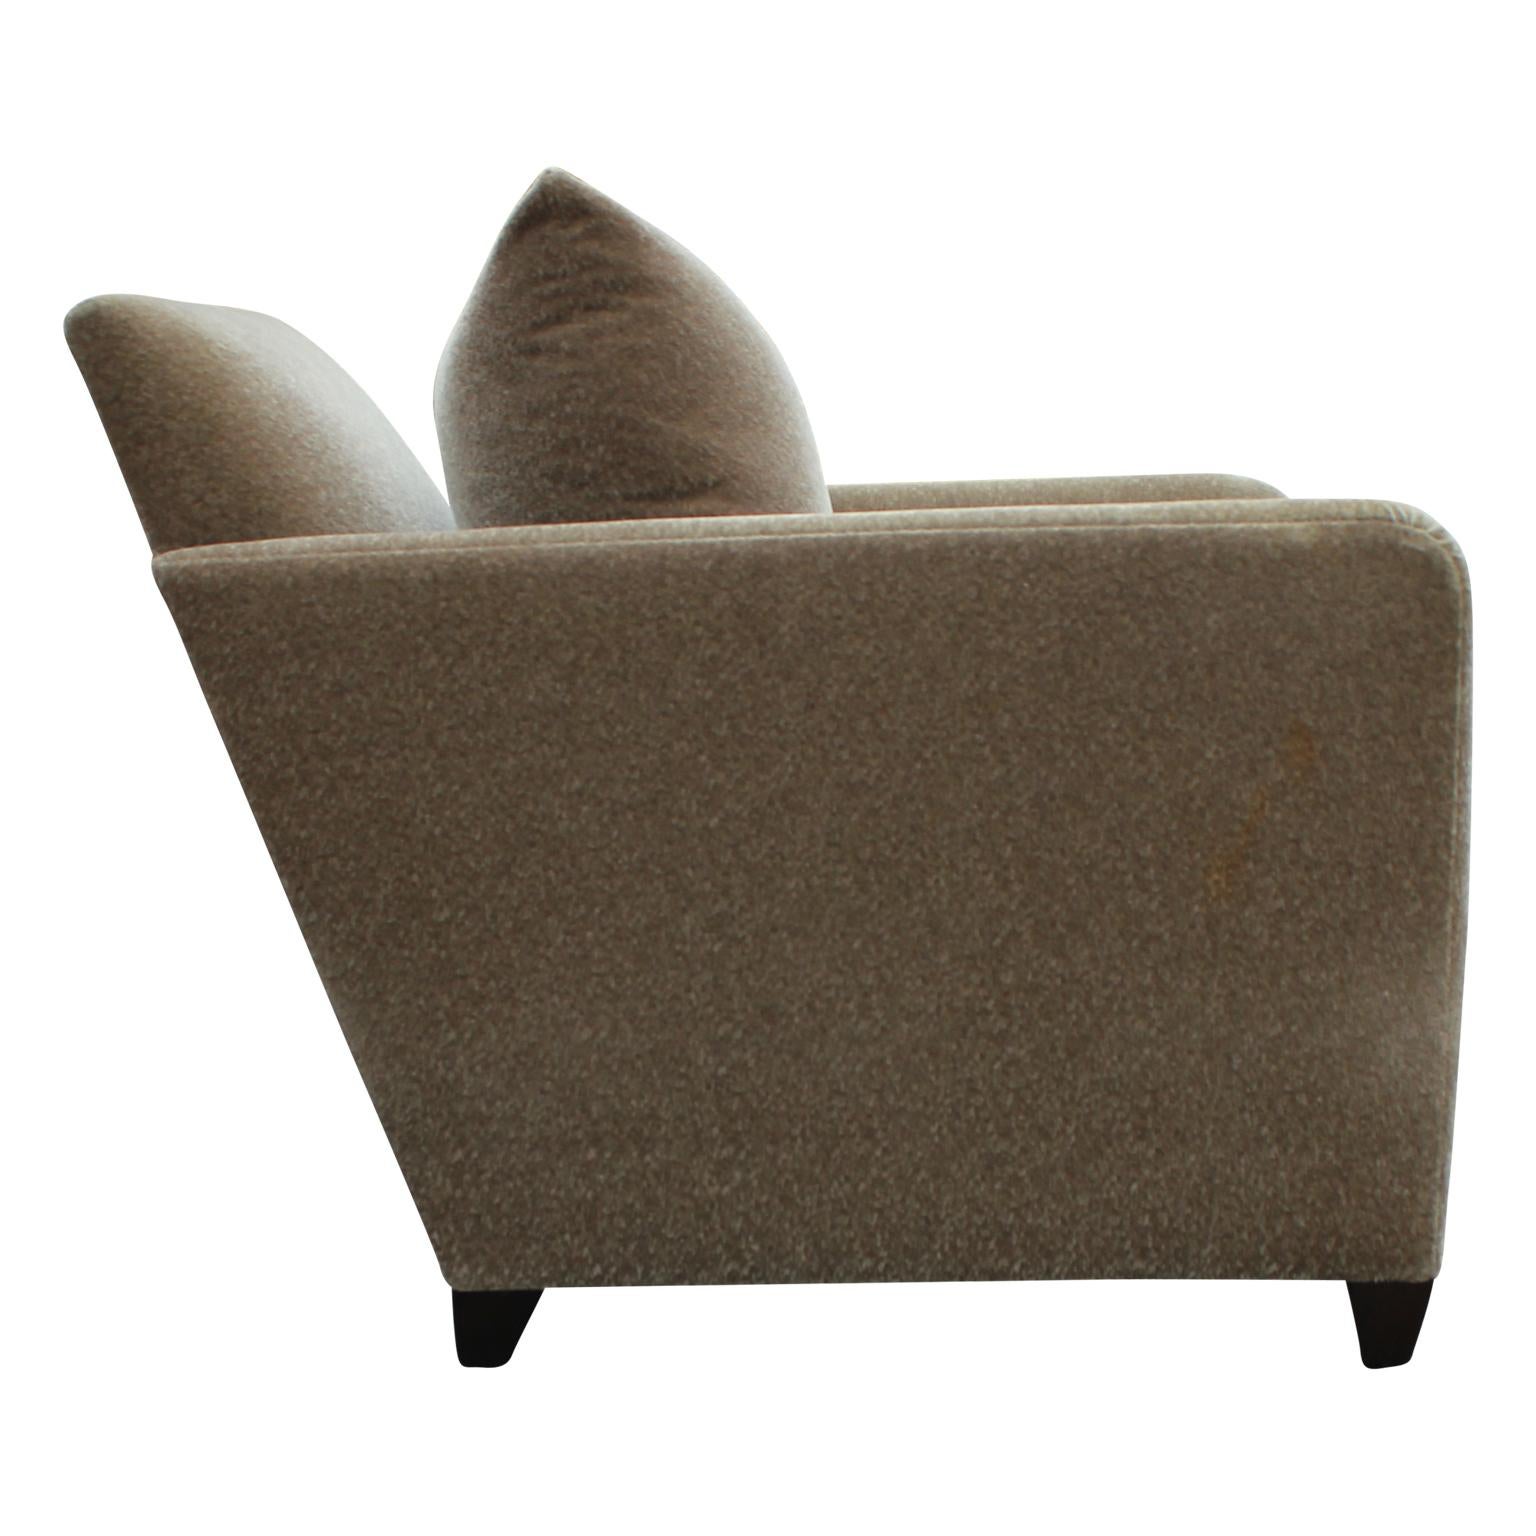 American Modern Pair of Olive Donghia Mohair Lounge / Club Chairs